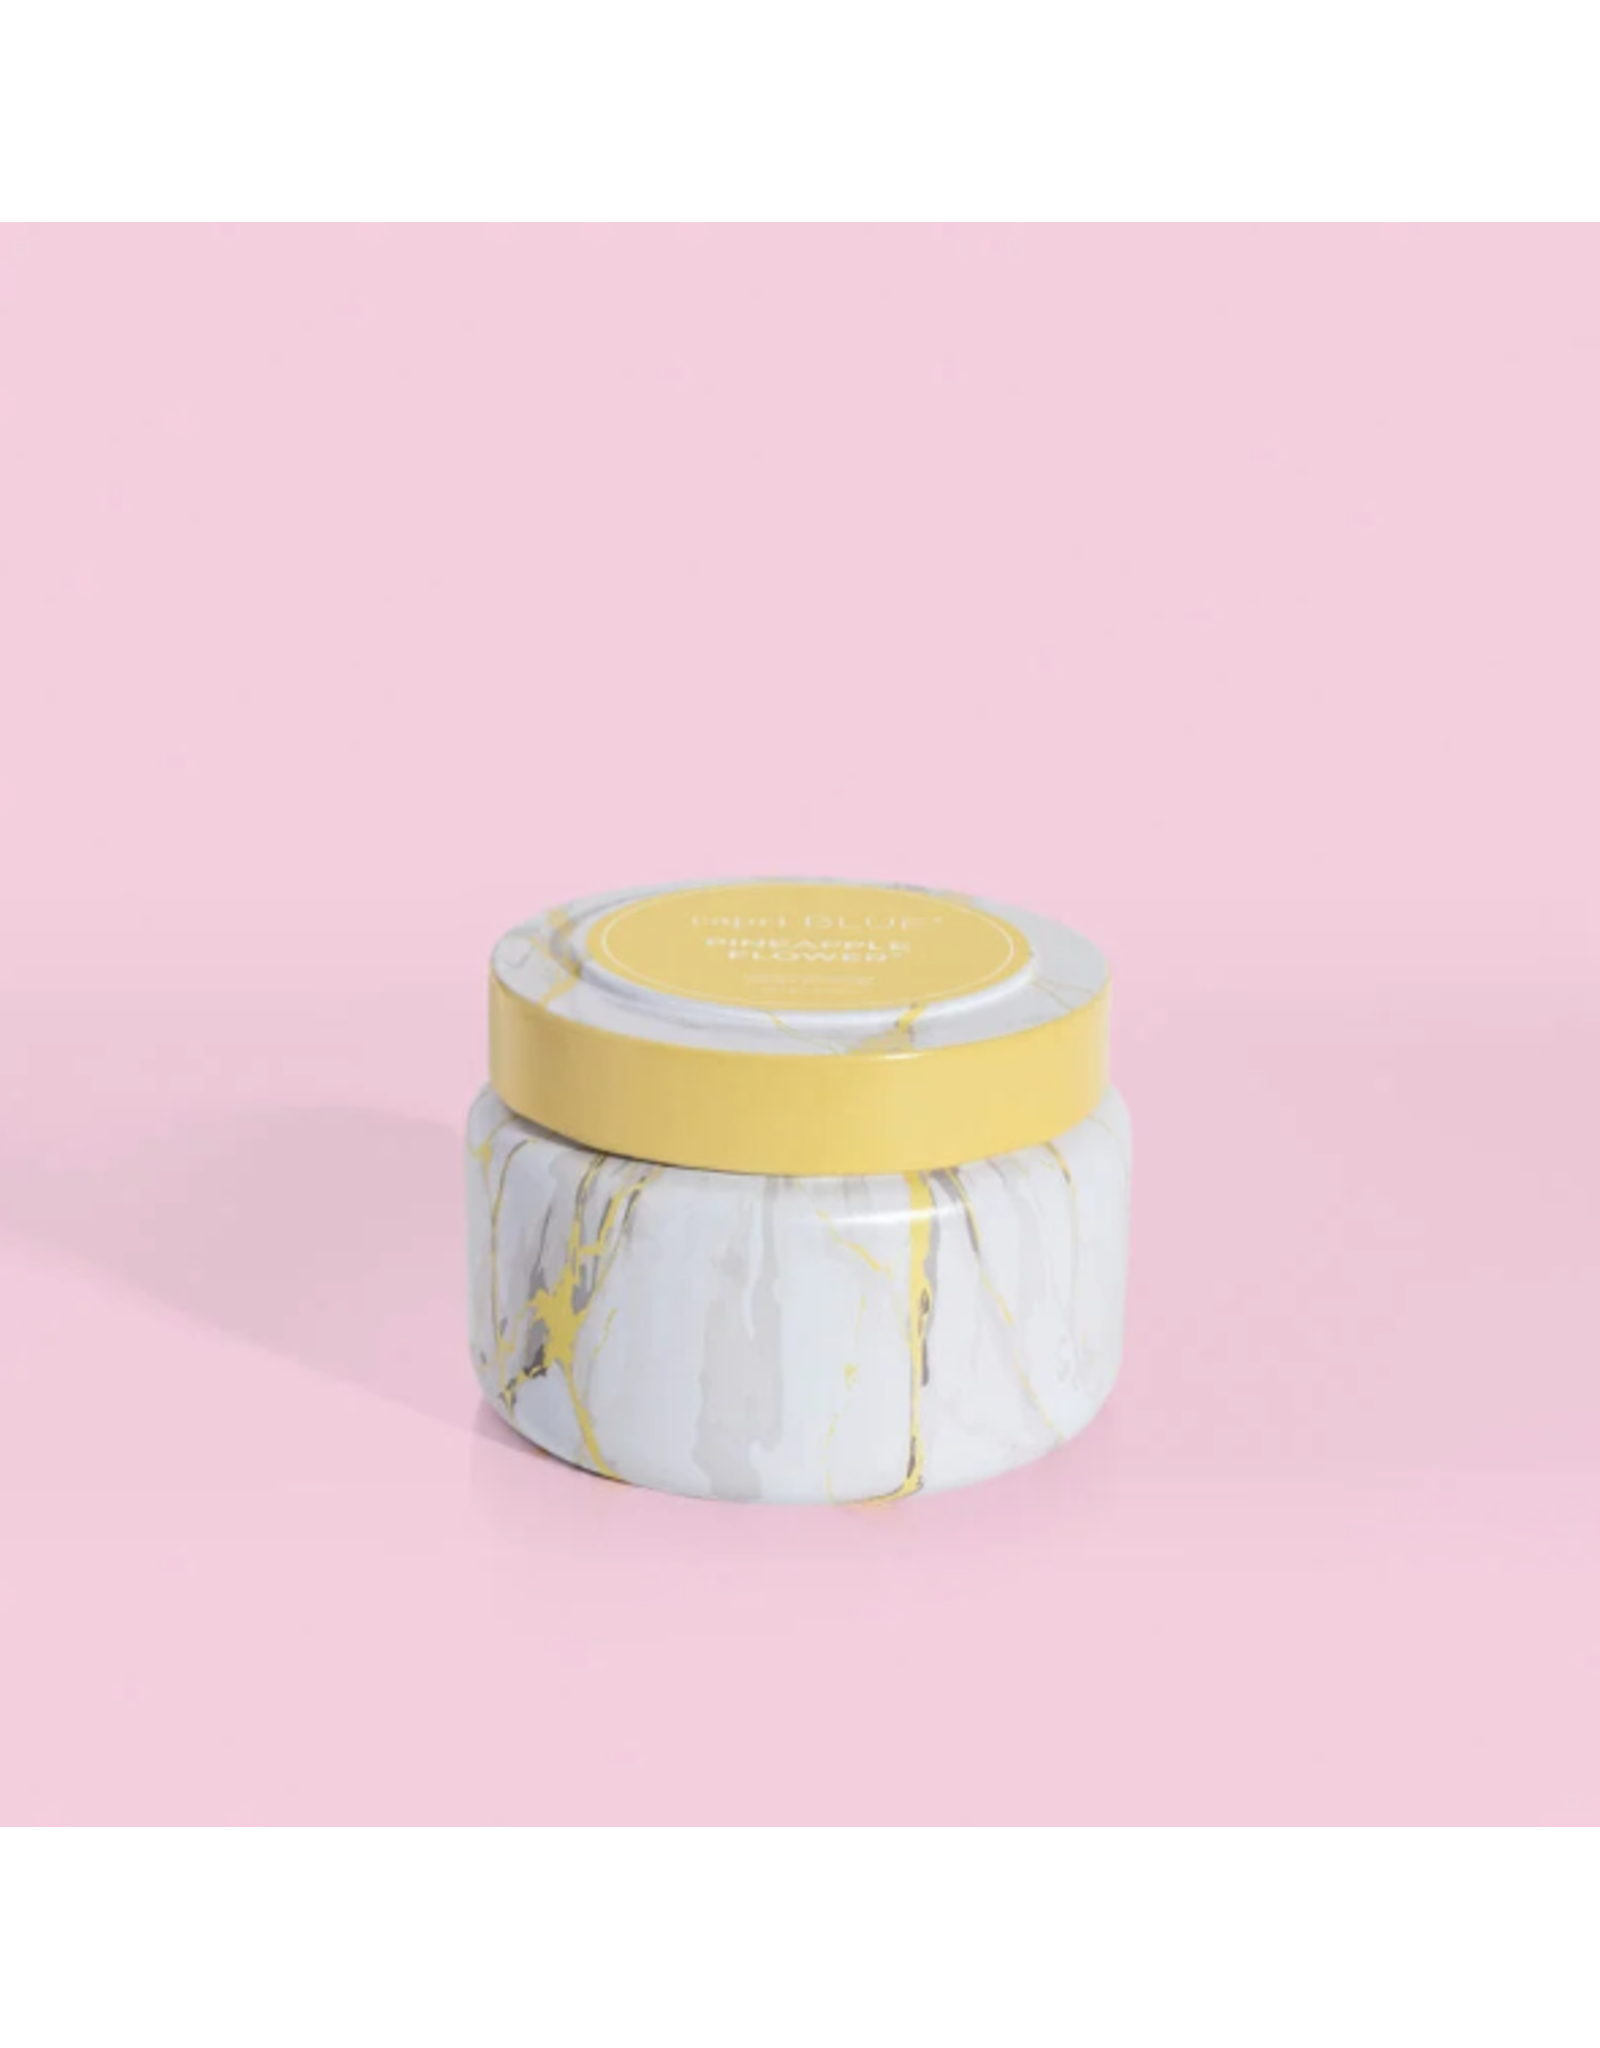 Candle 8.5 Travel Tin Mod Marble Pineapple Flower